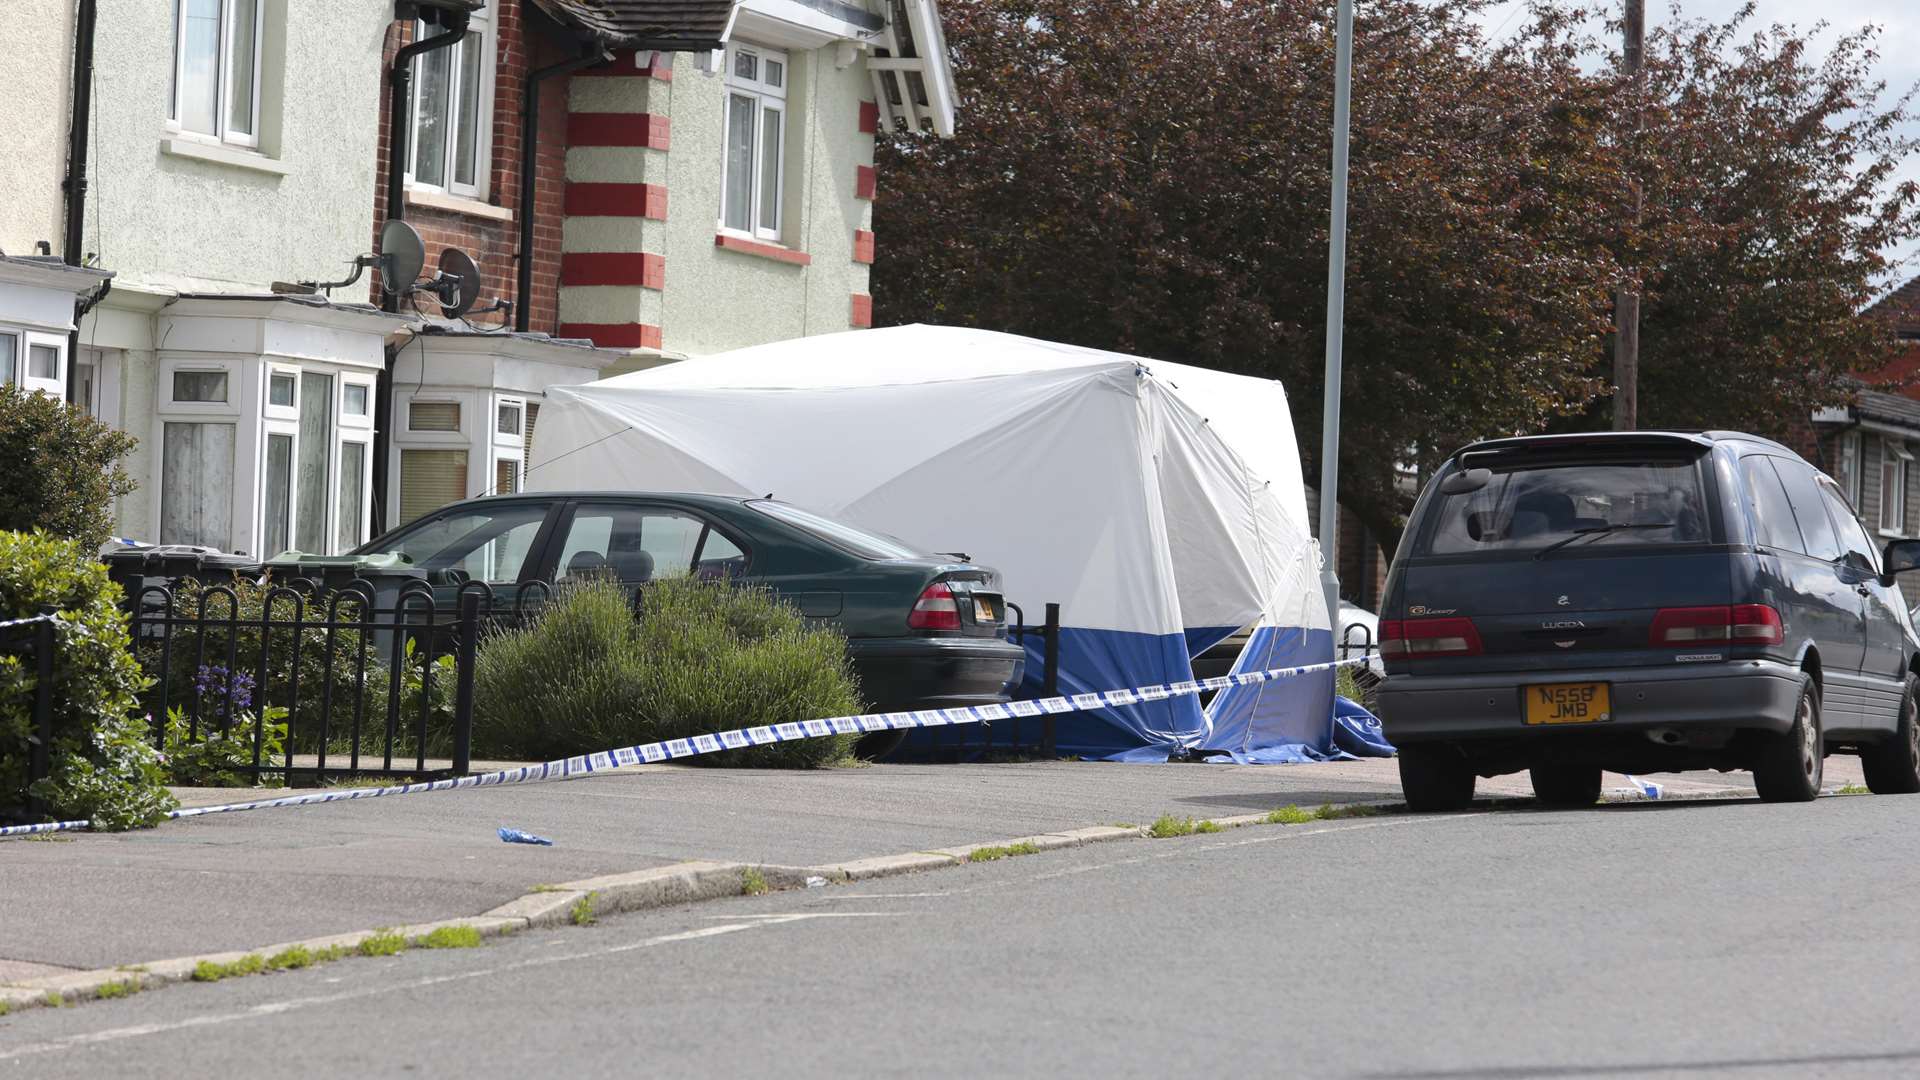 Police and forensic teams at the scene of the murder.